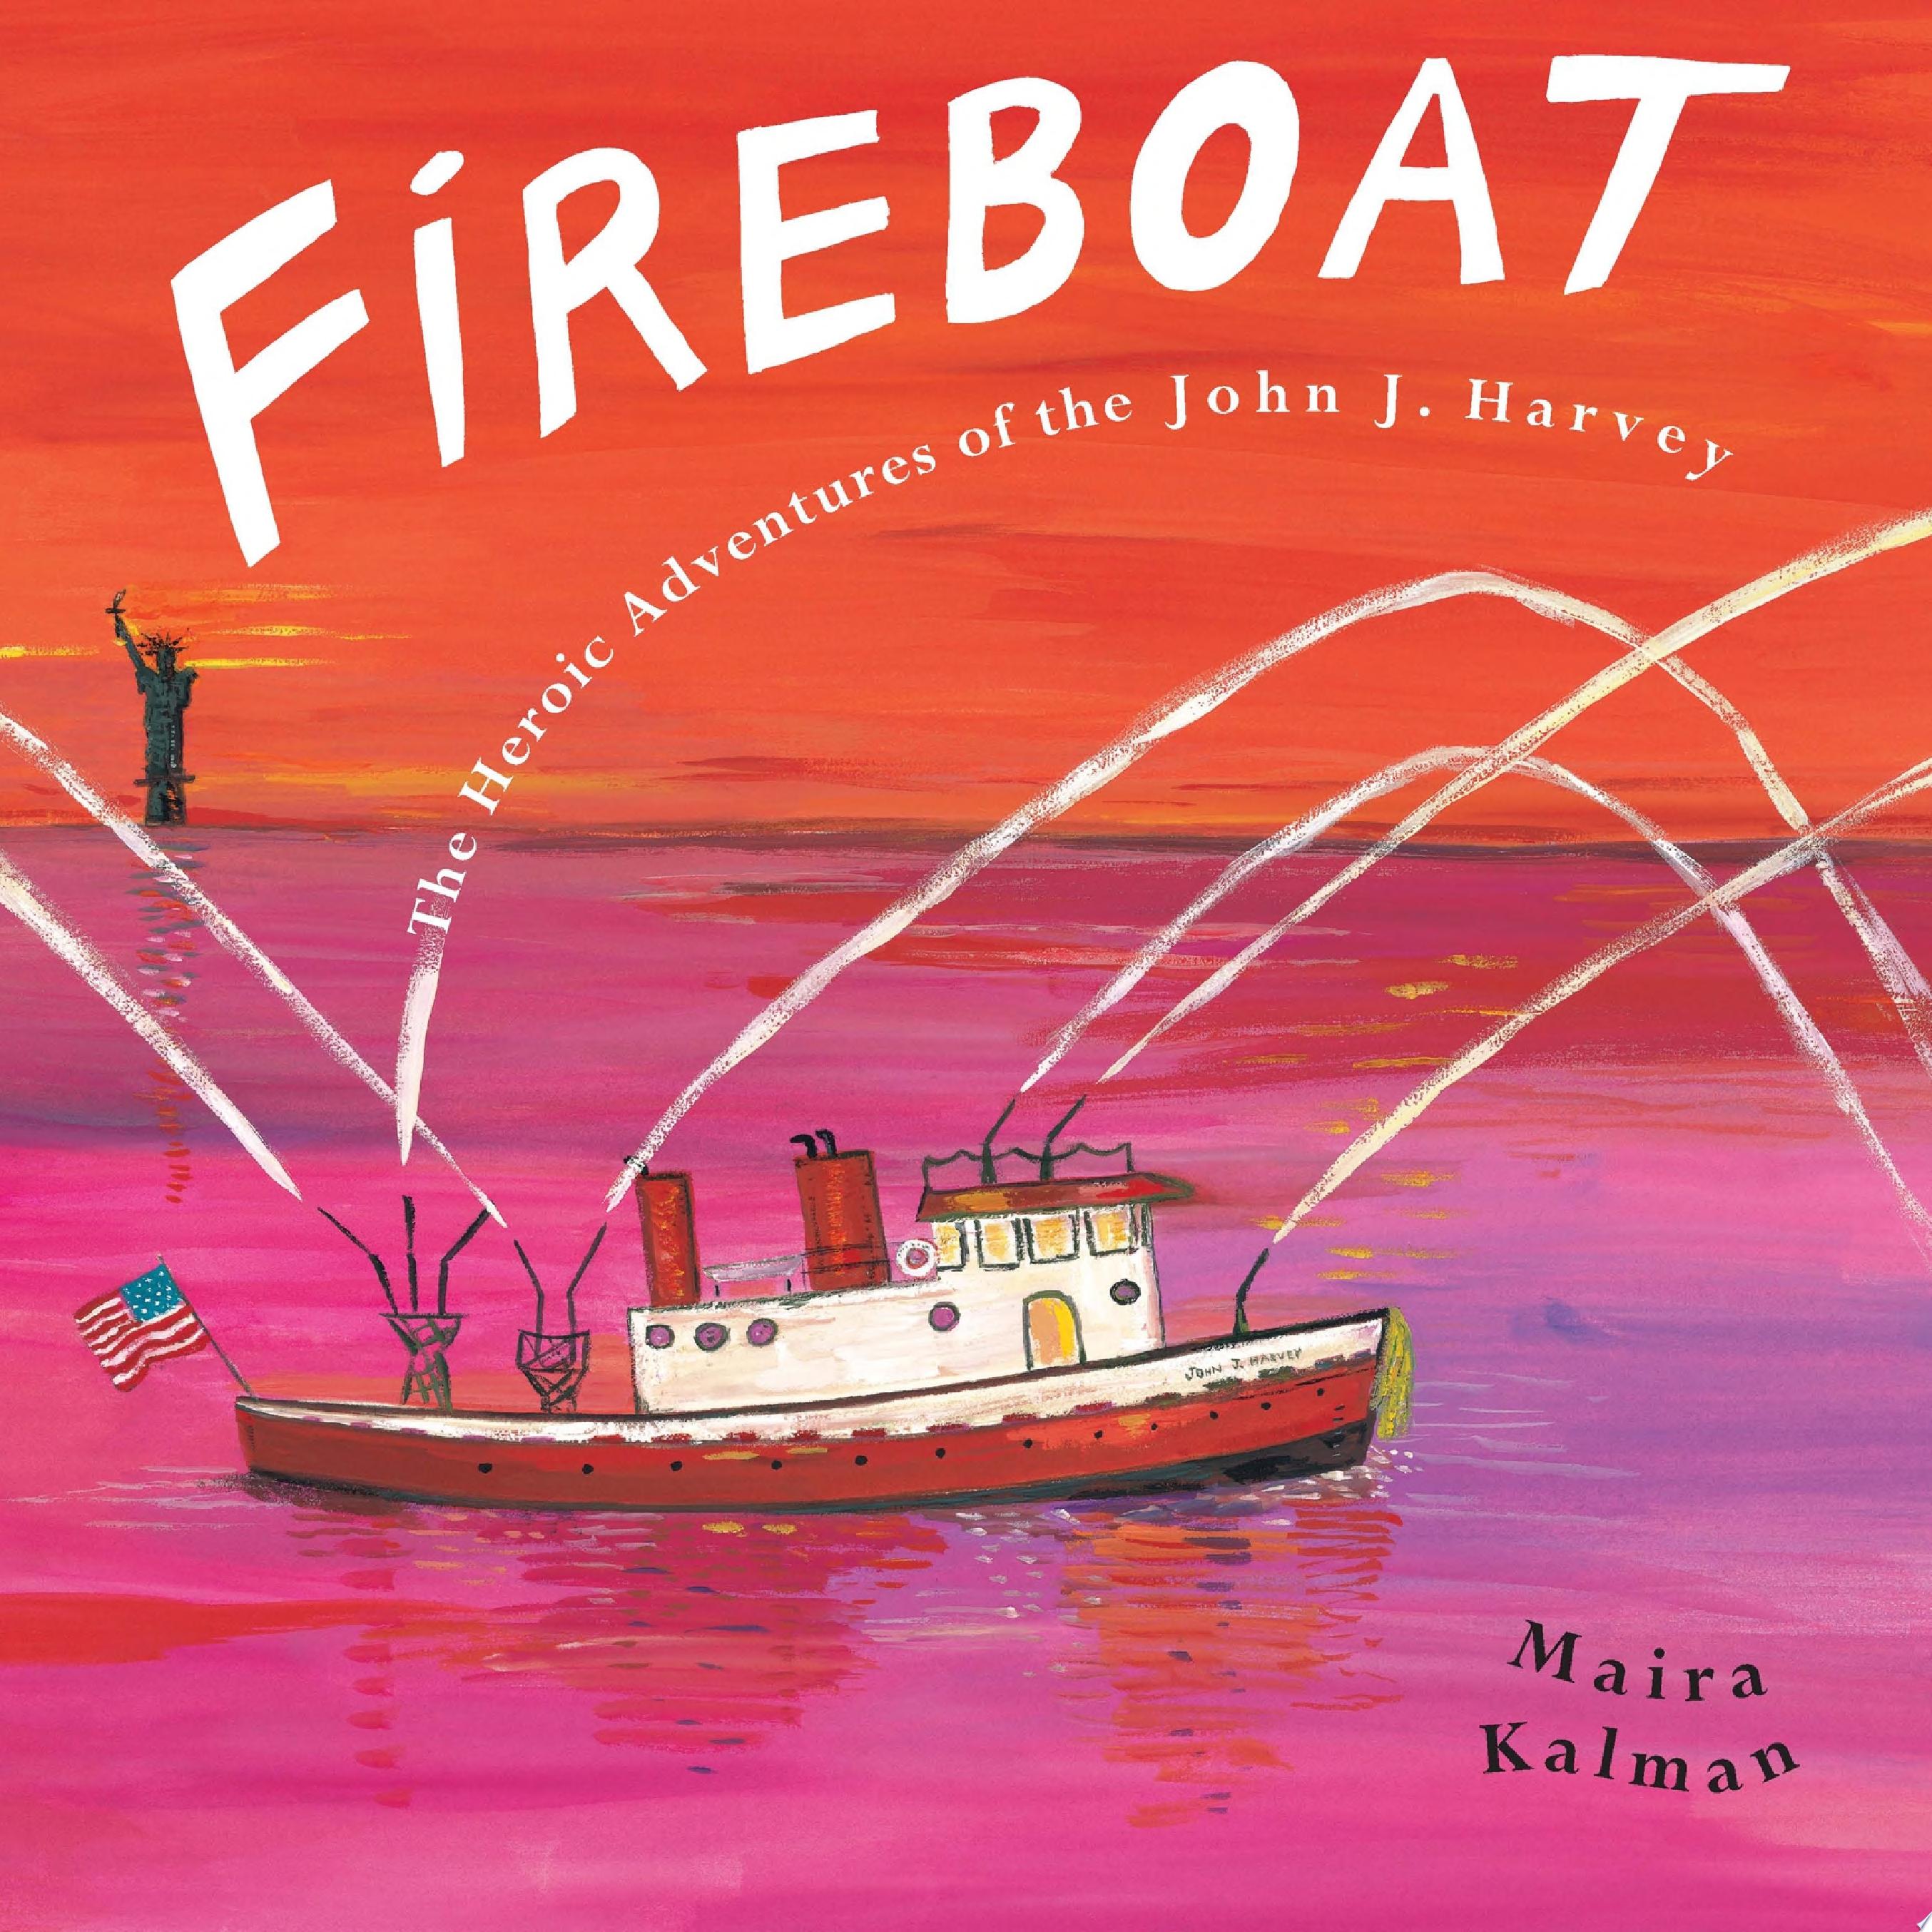 Image for "FIREBOAT"